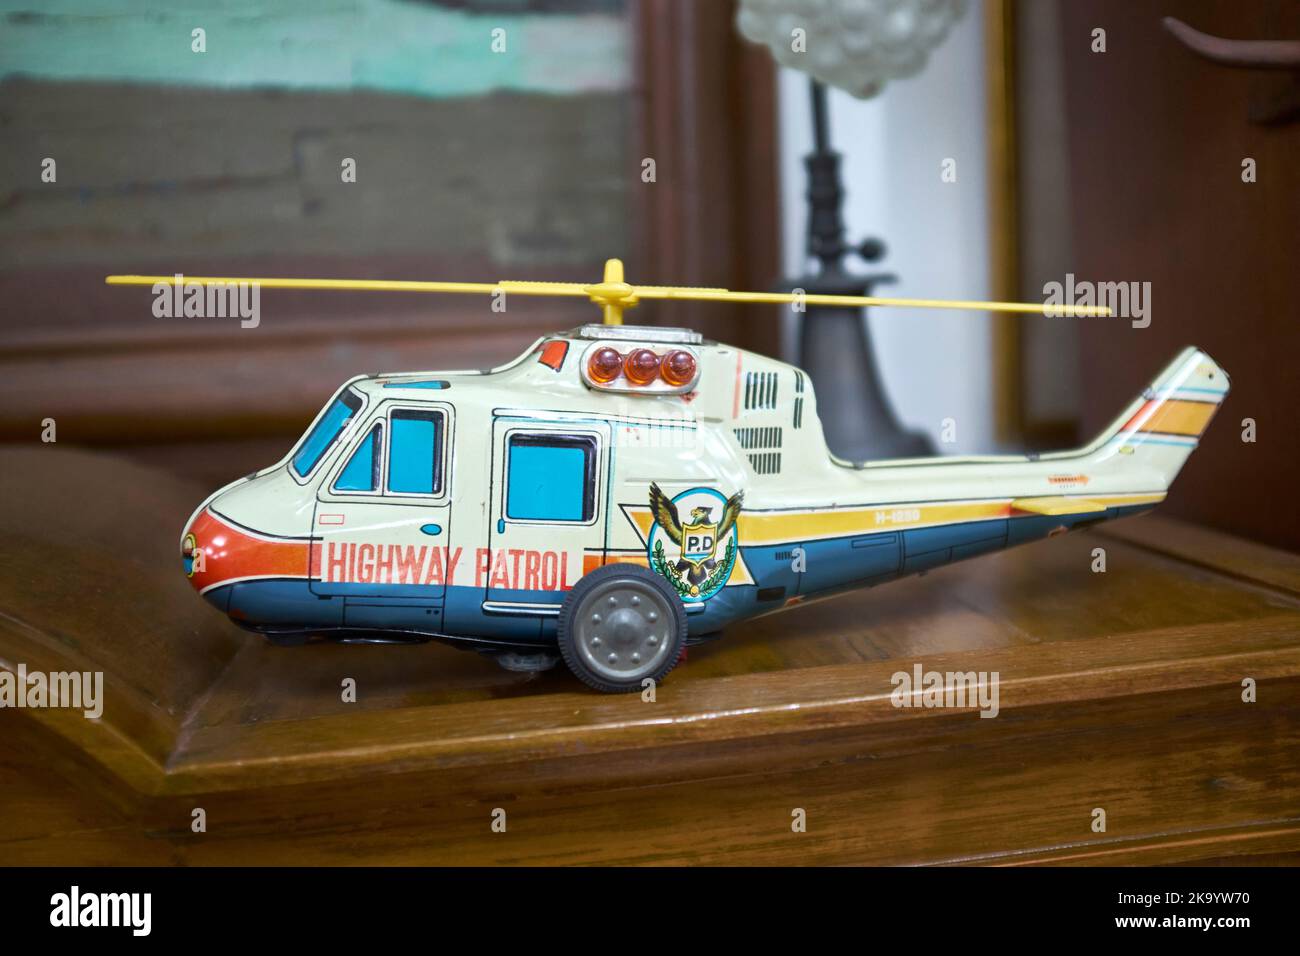 Toy Helicopter in the Million Toy Museum by Krirk Yoonpun in Ayutthaya Thailand Stock Photo